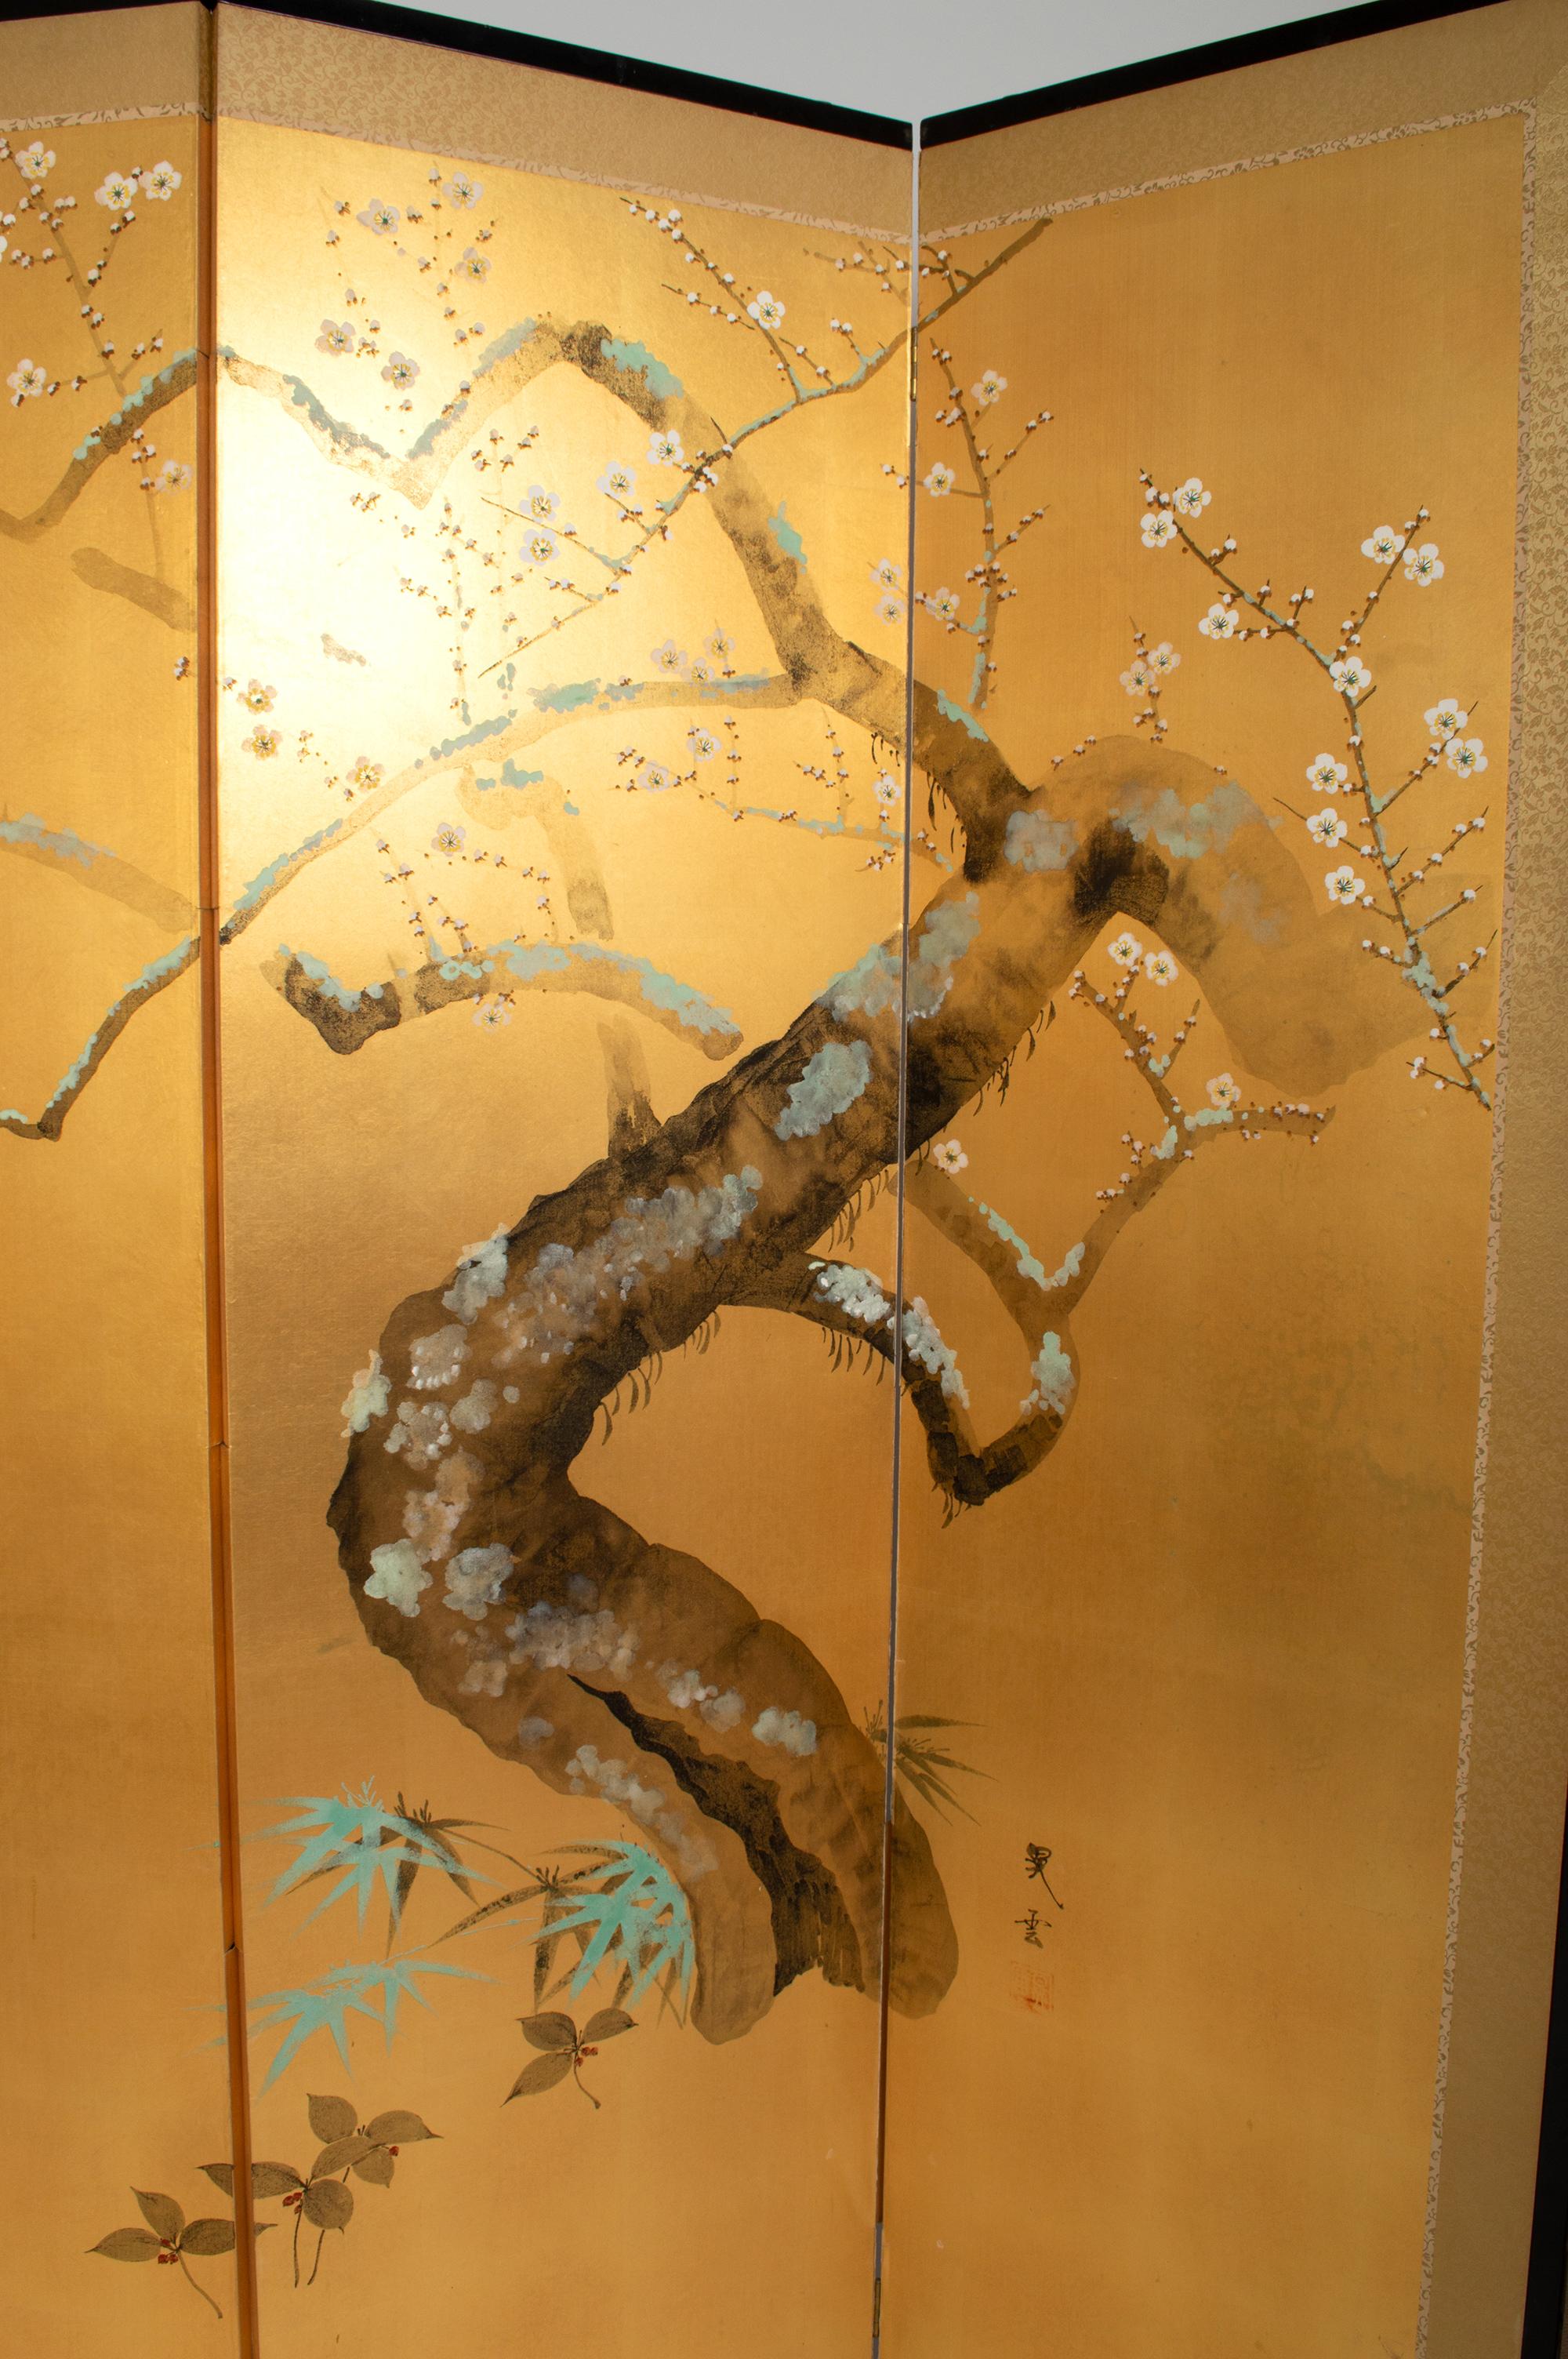 Antique Japanese four-panel screen ‘Byobu’. Nihonga School, Showa period, circa 1930.
The four-panel screen is in gold leaf with the depiction of a flowering prunus tree with spring blossom in vivid mineral pigments. Gold leaf plated mulberry paper